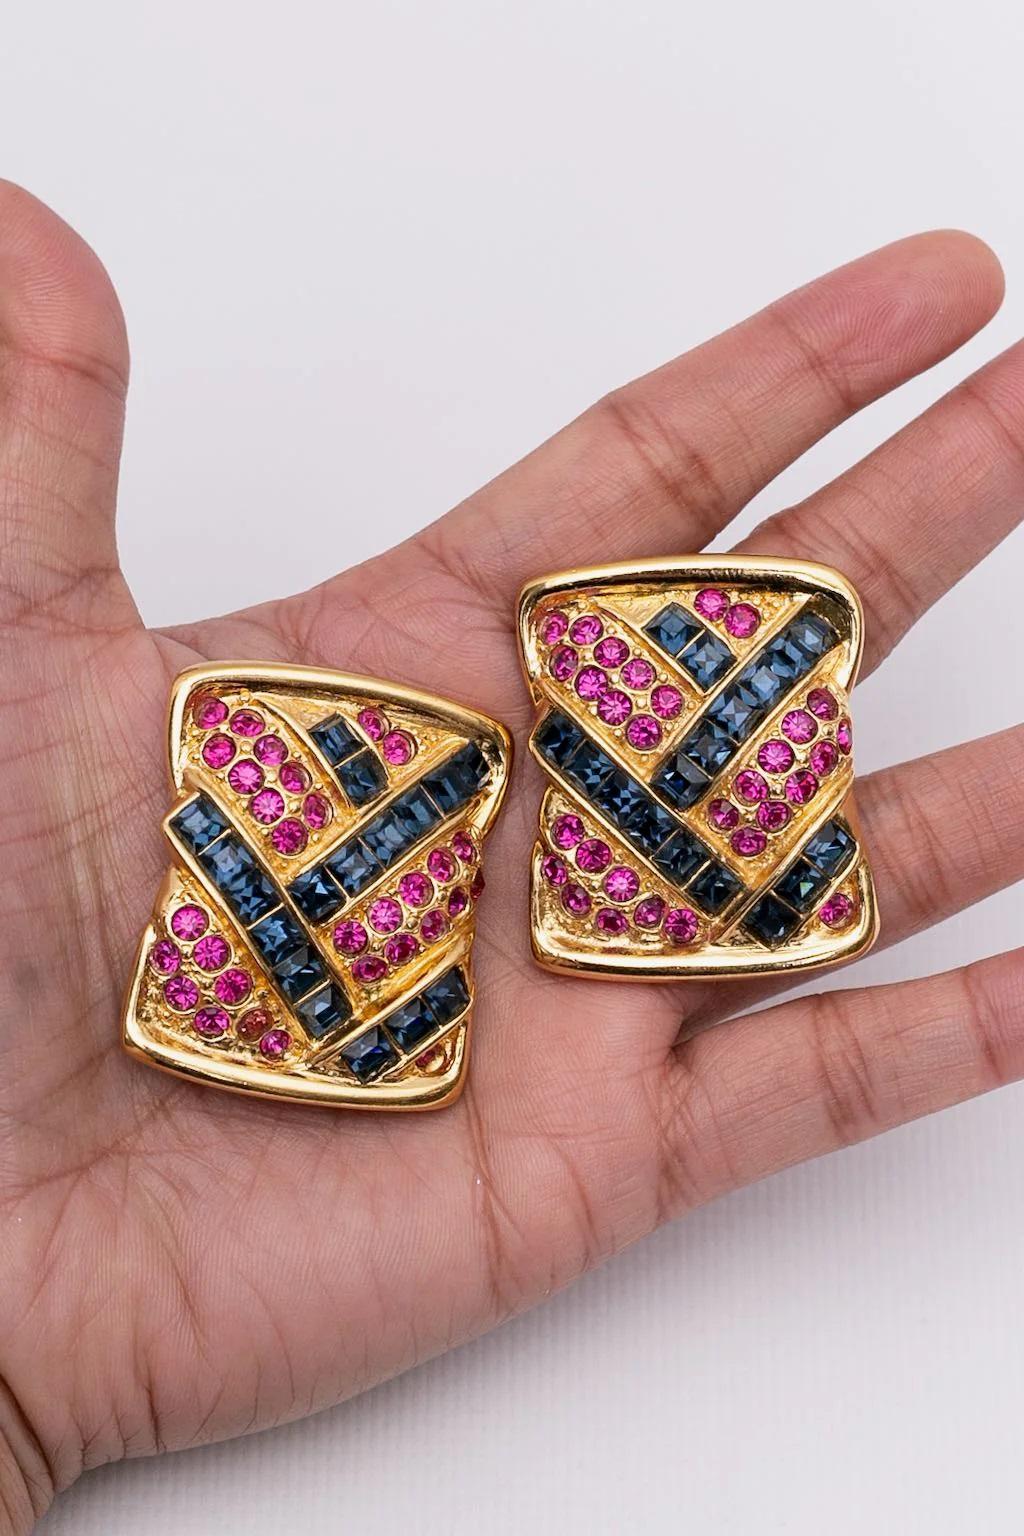 Yves Saint Laurent Gilted Metal Clip-on Earrings with Pink and Blue Rhinestones In Excellent Condition For Sale In SAINT-OUEN-SUR-SEINE, FR